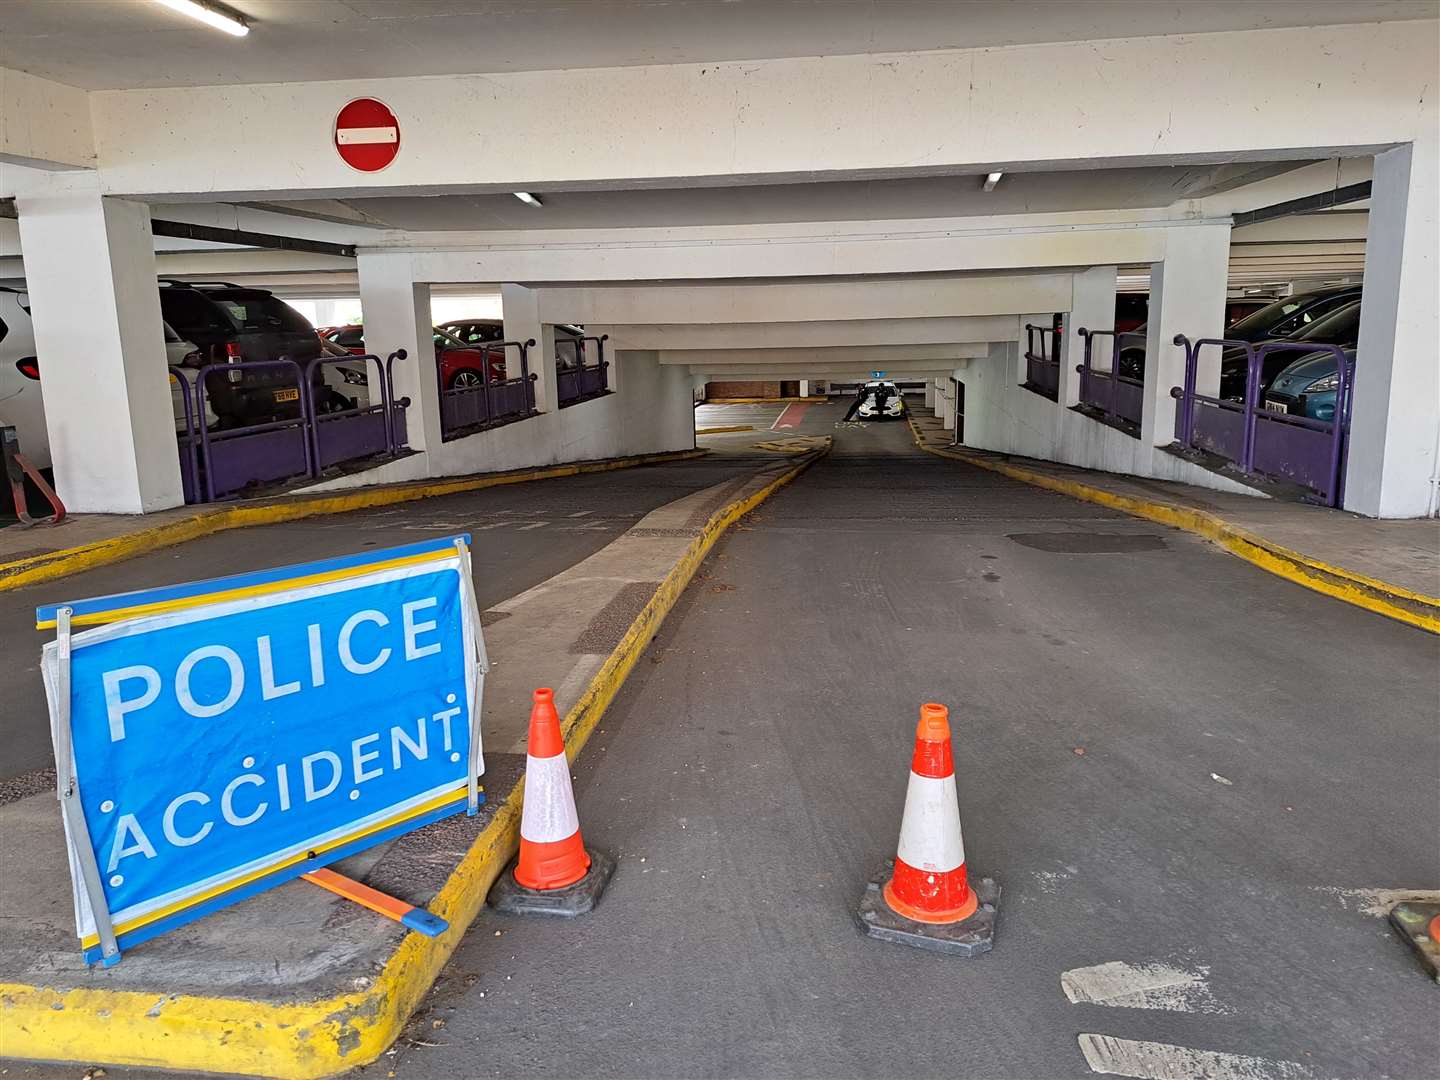 Police were called on Easter Monday after a body was found in Castle Street car park in Canterbury